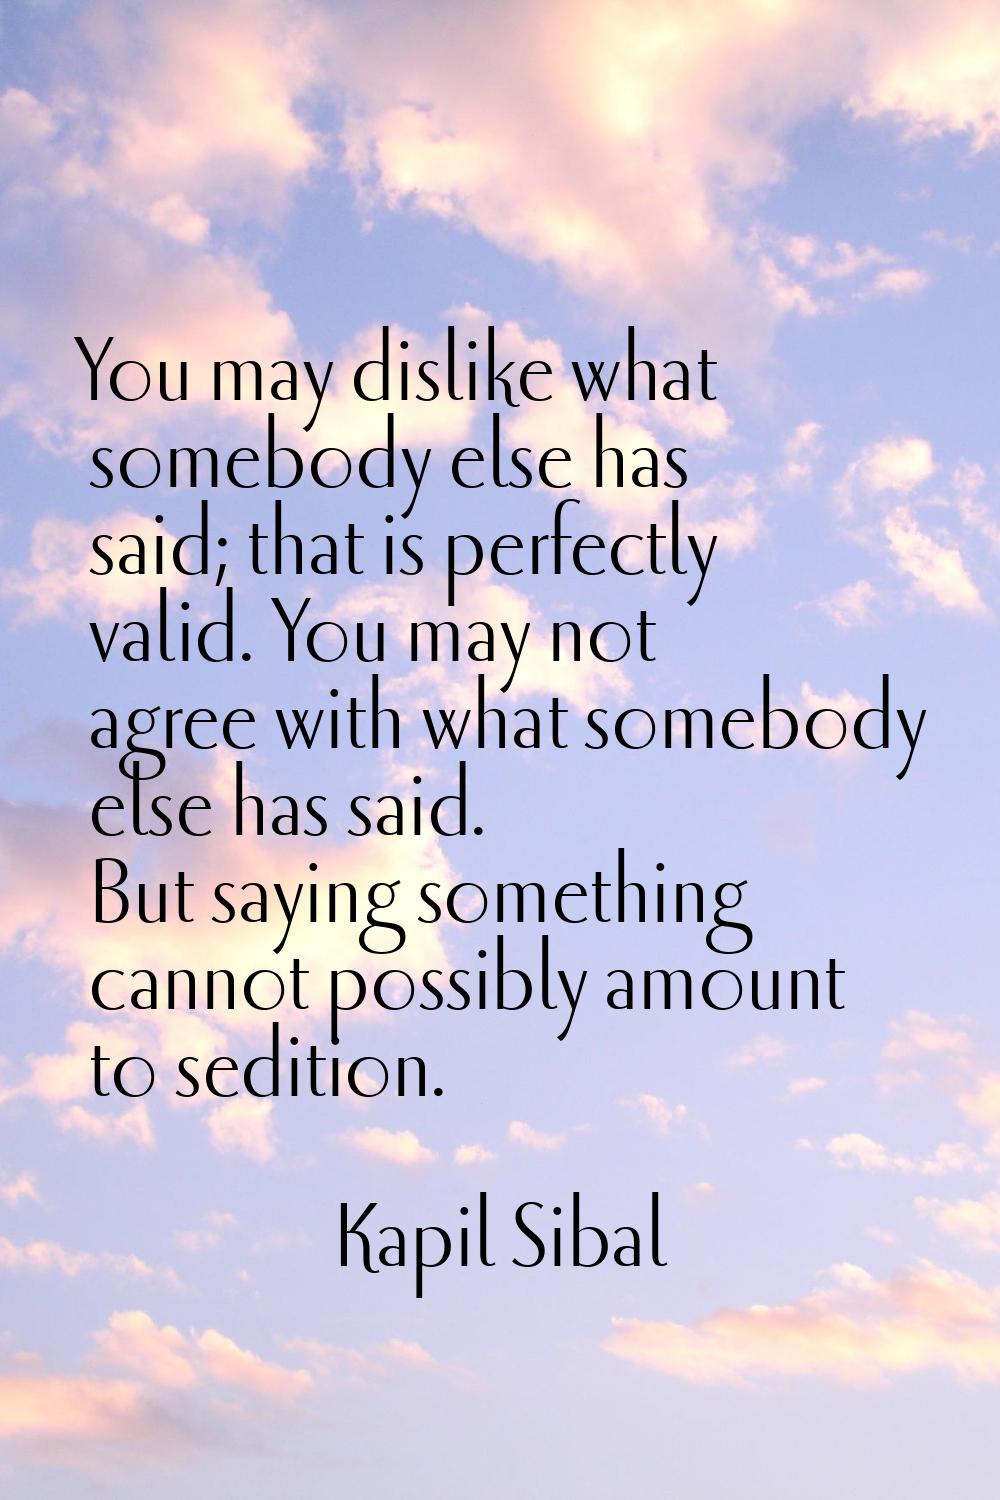 You may dislike what somebody else has said; that is perfectly valid. You may not agree with what s